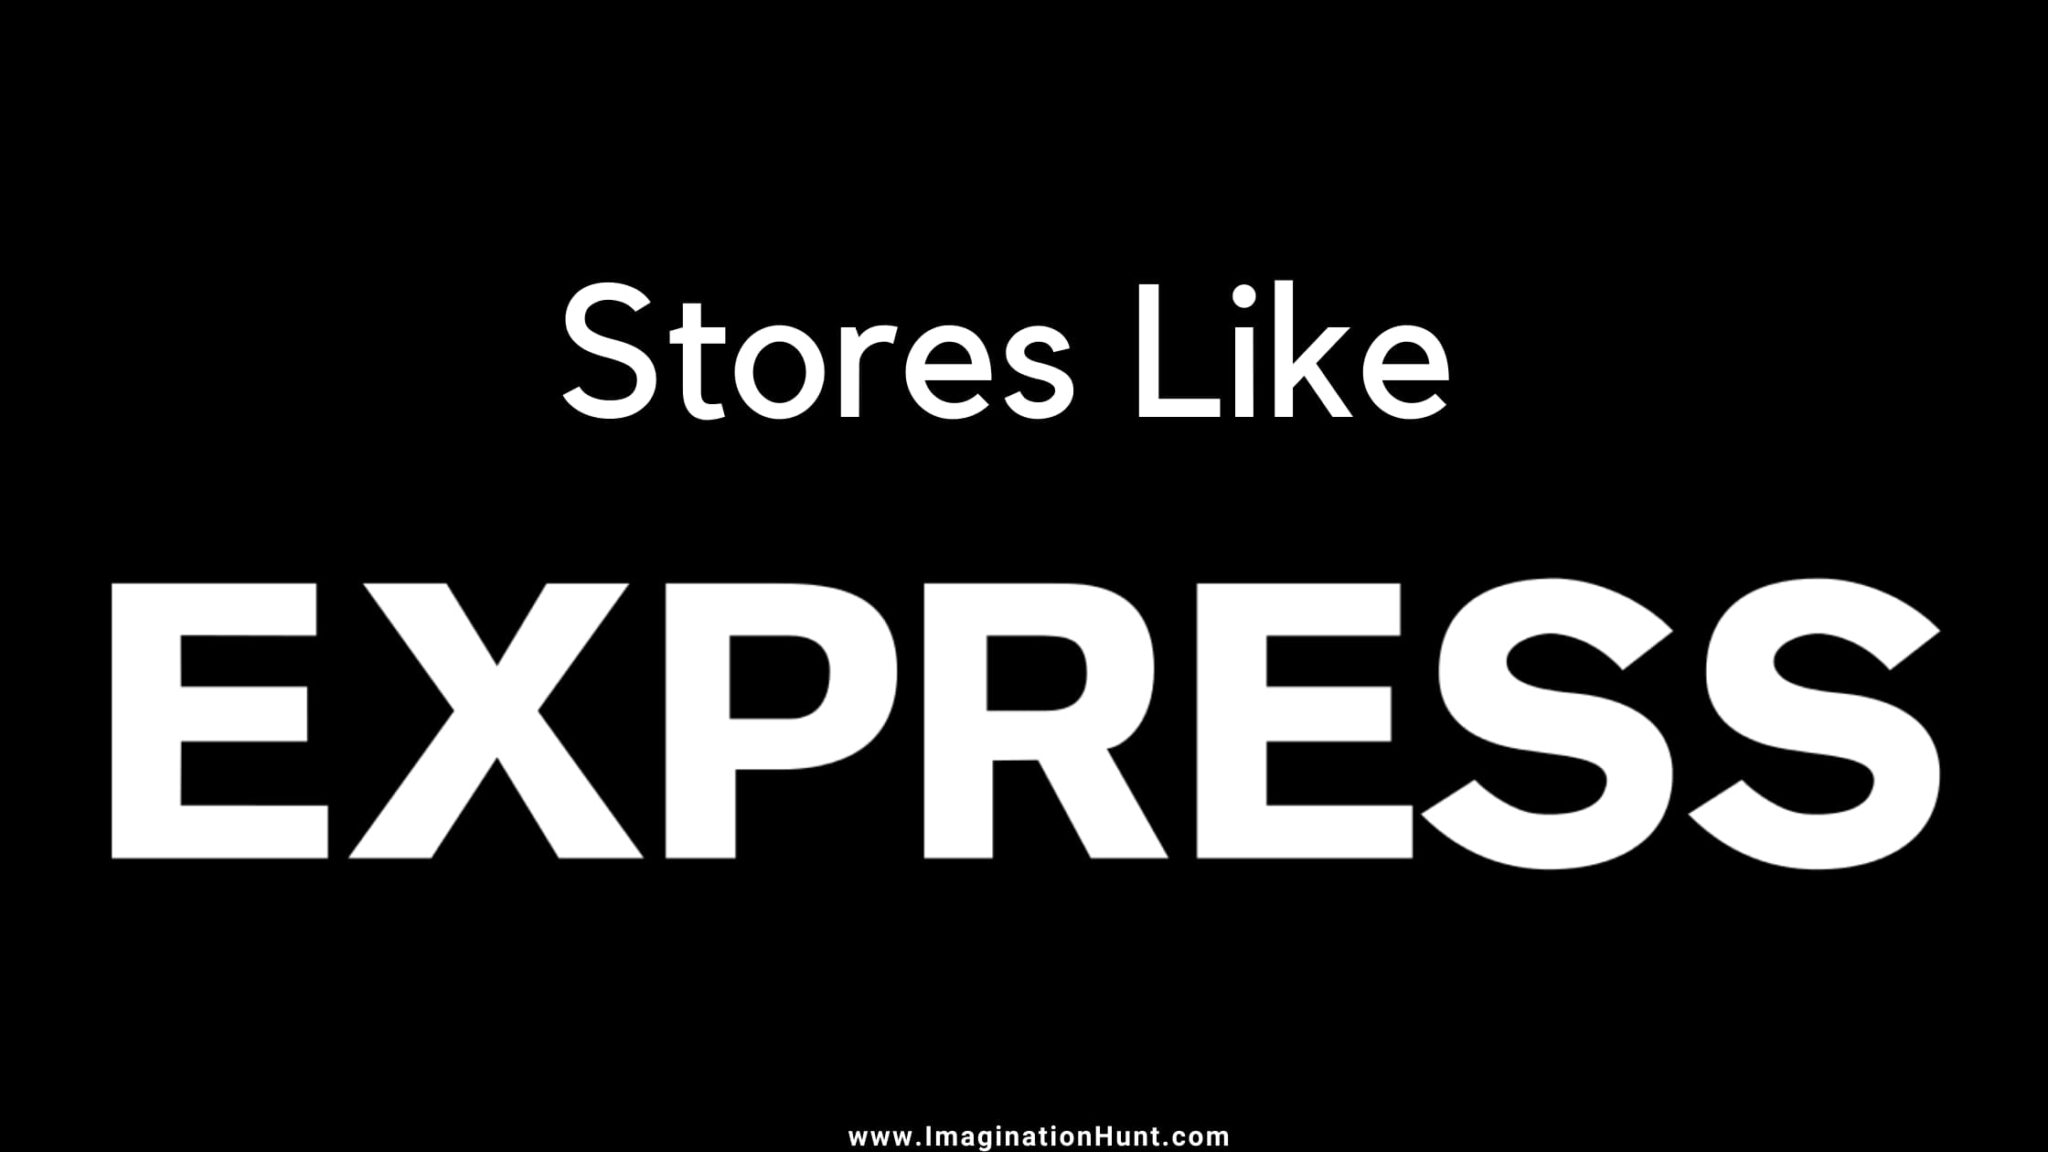 Stores like Express to Shop for Informal & Party Looks - Imagination Hunt